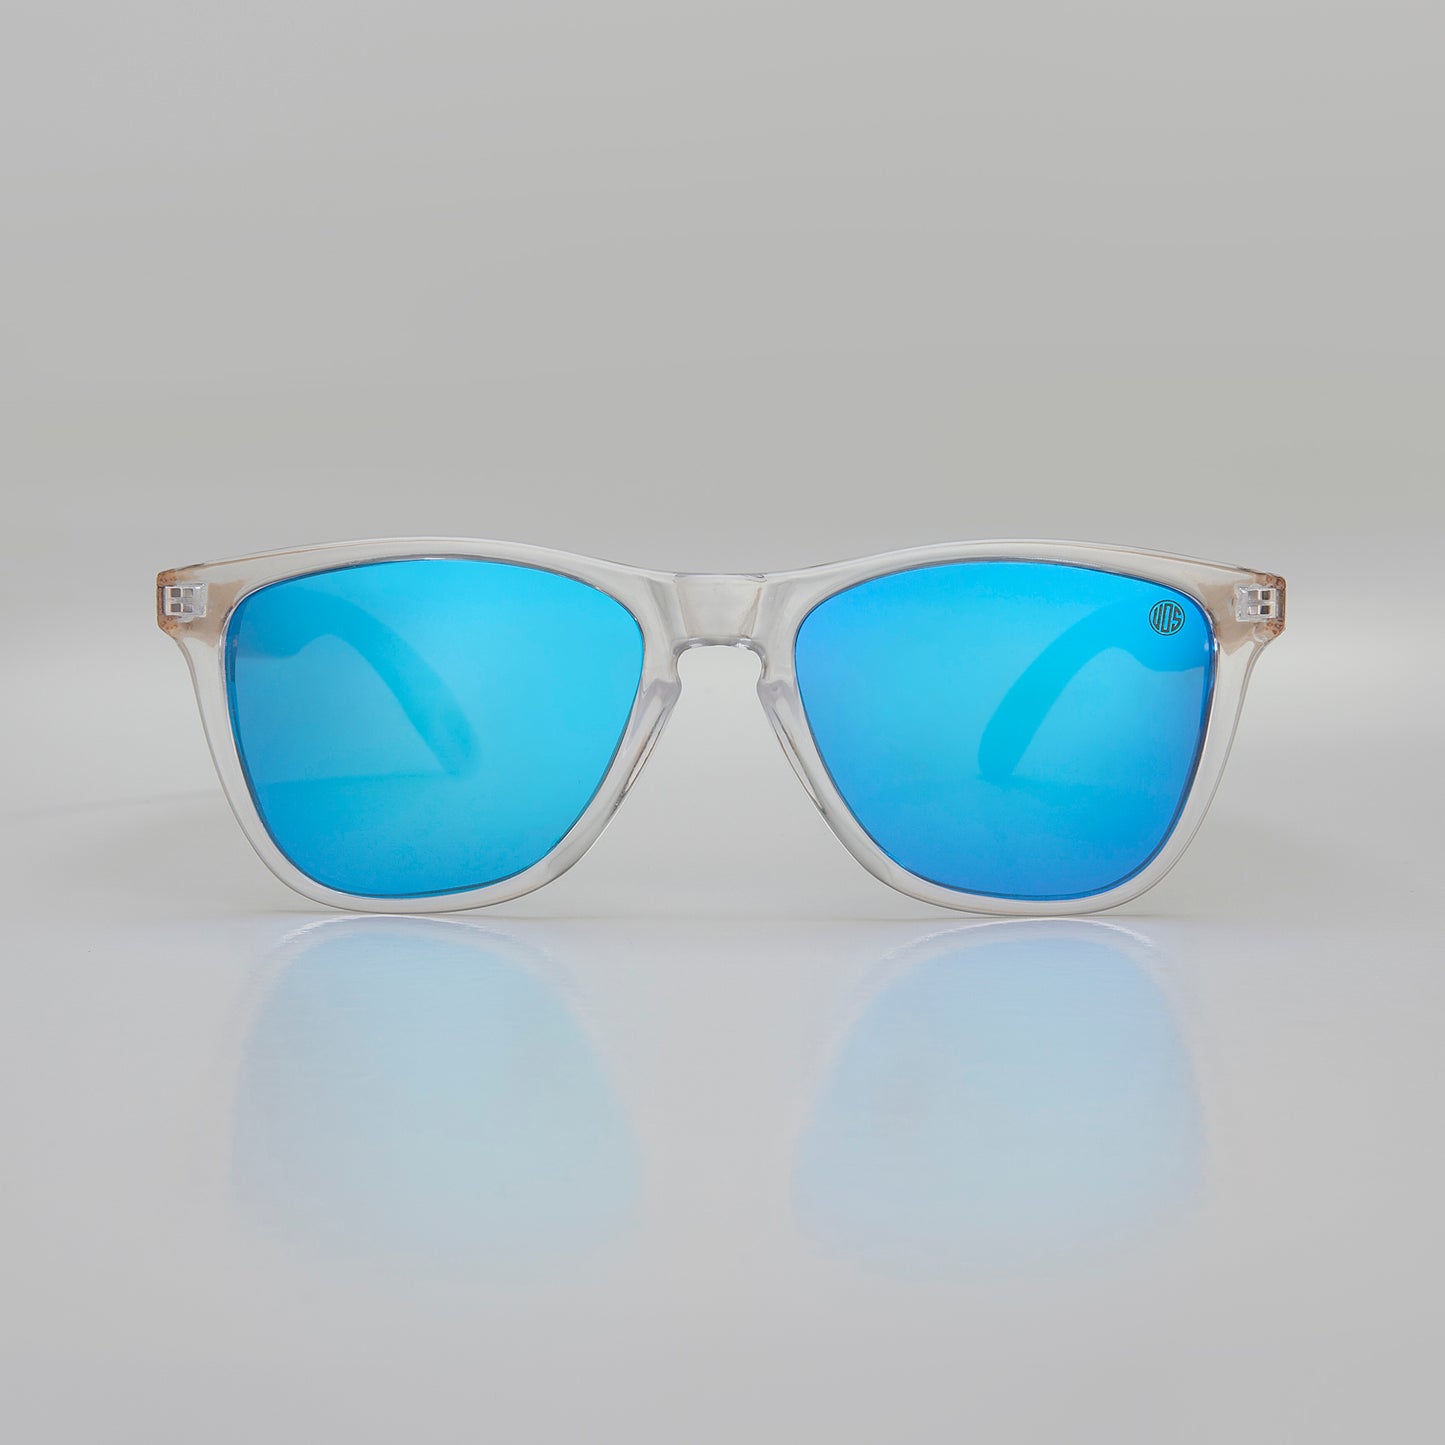 Womens Sunglasses Eco Friendly with blue polarised lens